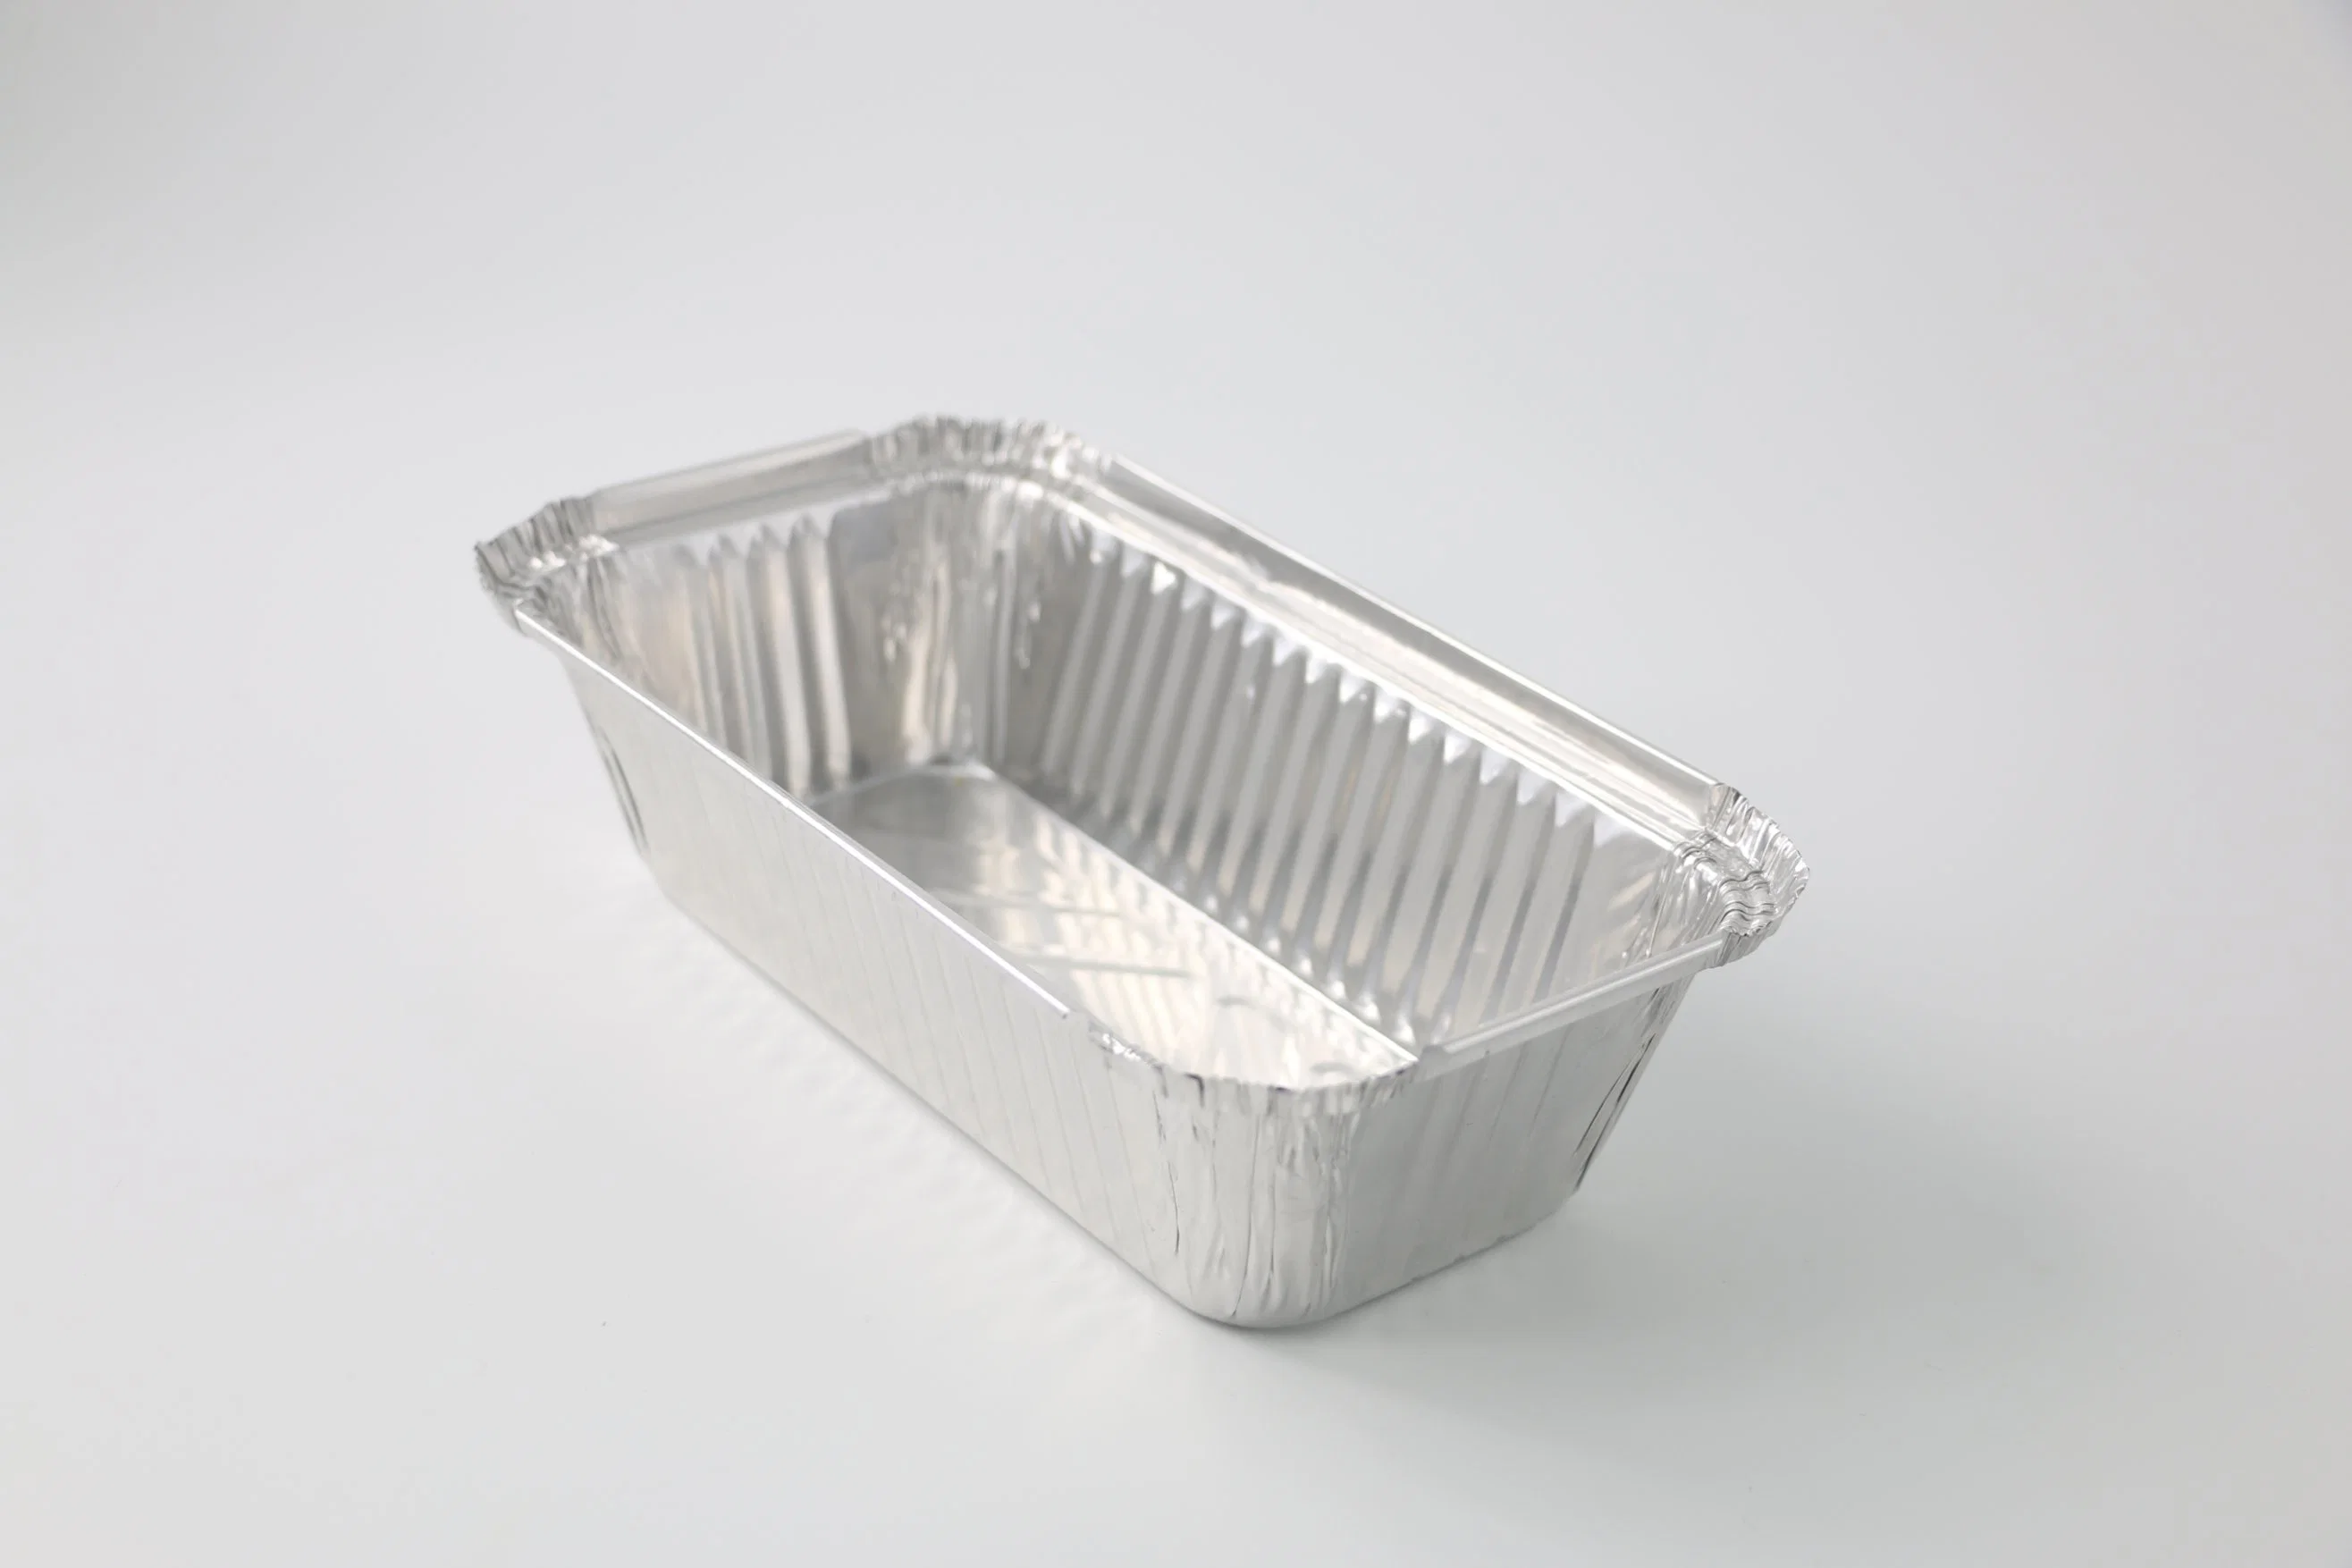 6.5" Pizza Plate Aluminum Foil Plate Barbecue Plate Aluminum Foil Disposable Cake Tray Tin Foil Plate Tin Foil Dishes